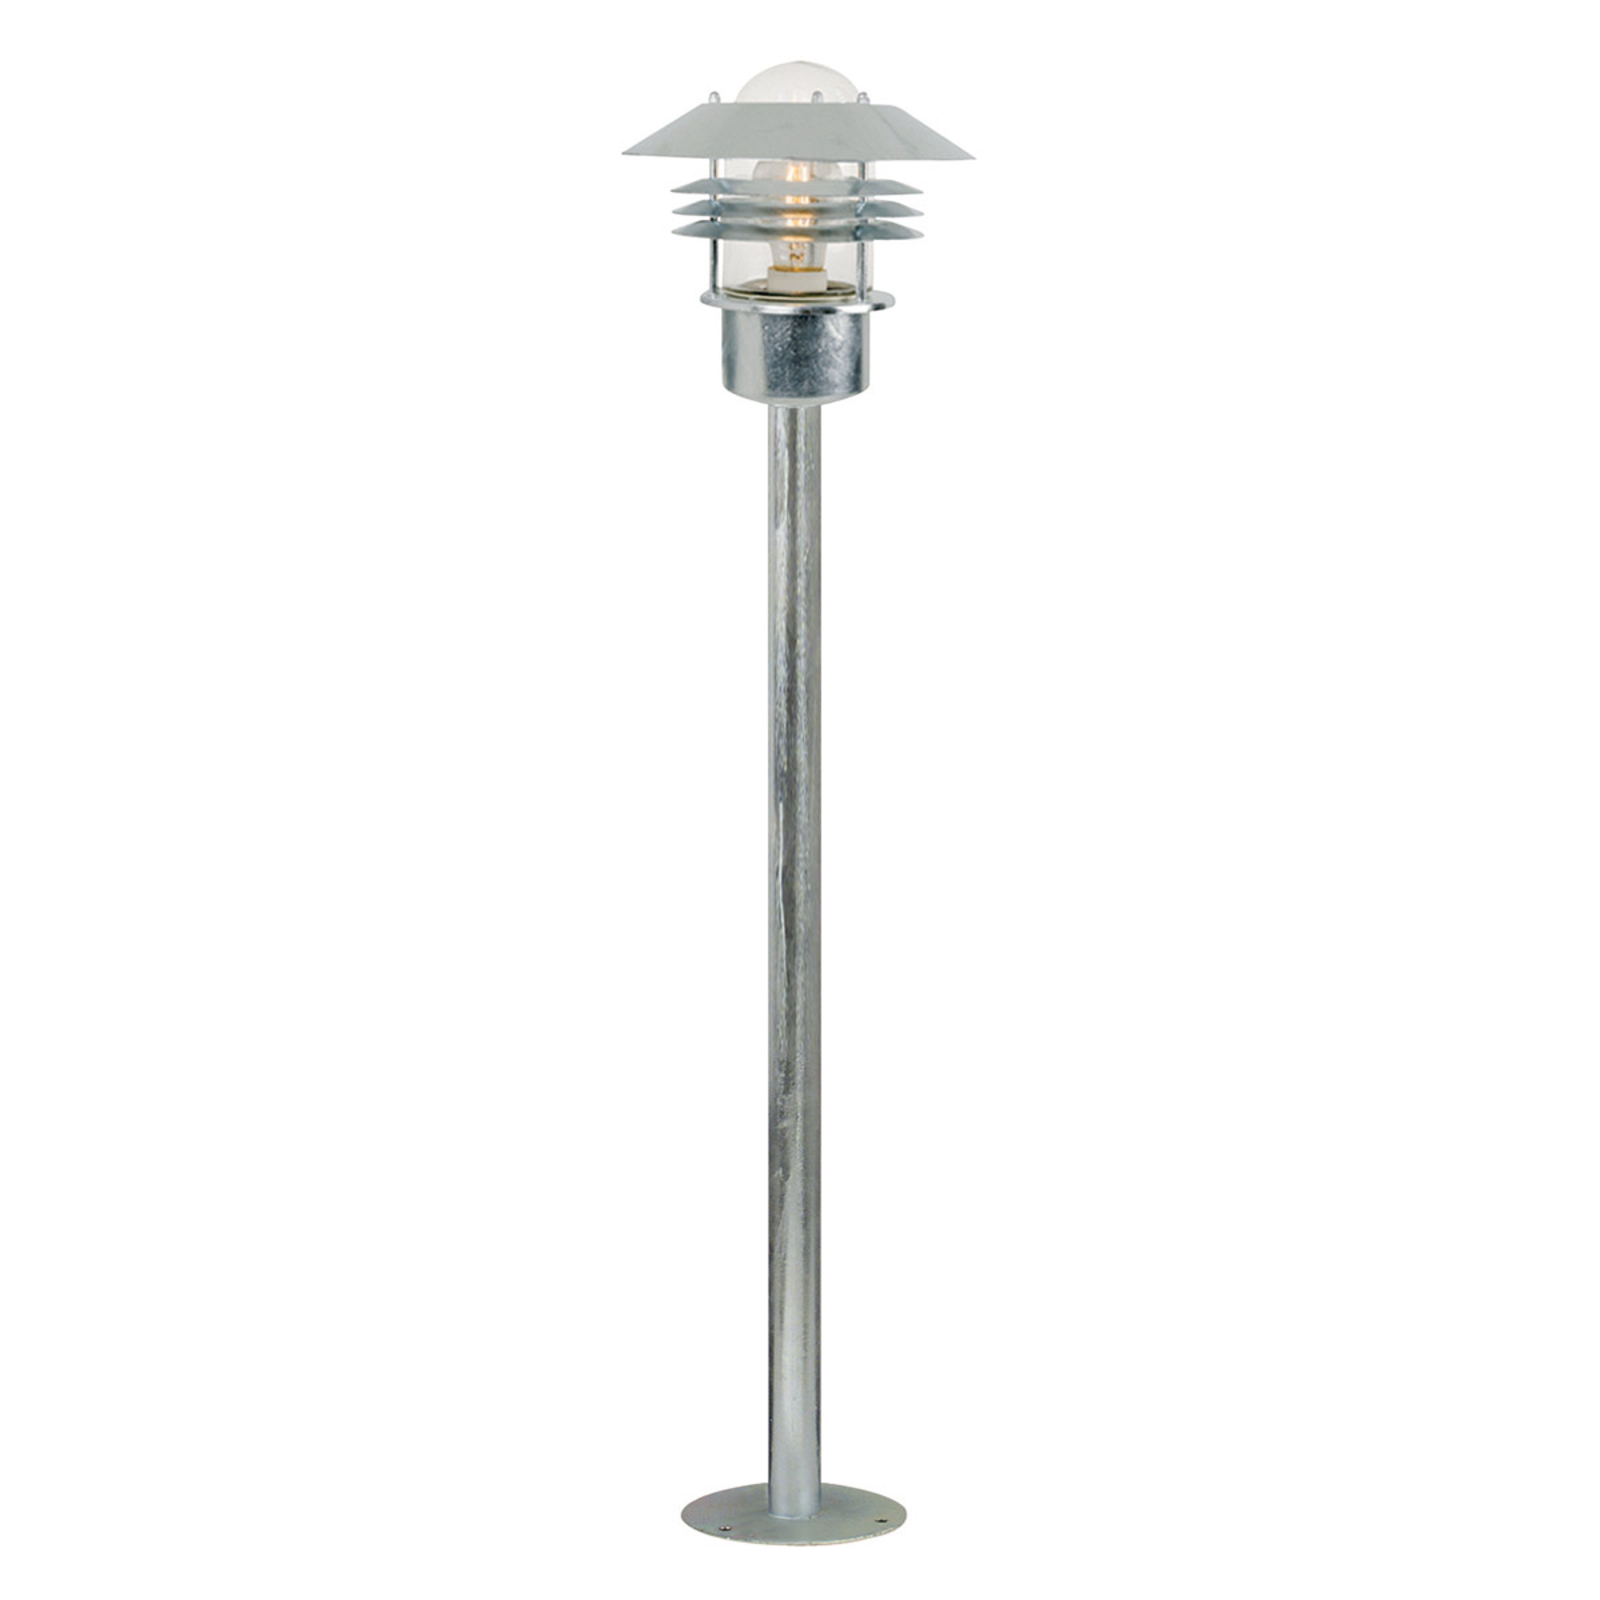 Pathway lamp Vejers, hot-dipped steel